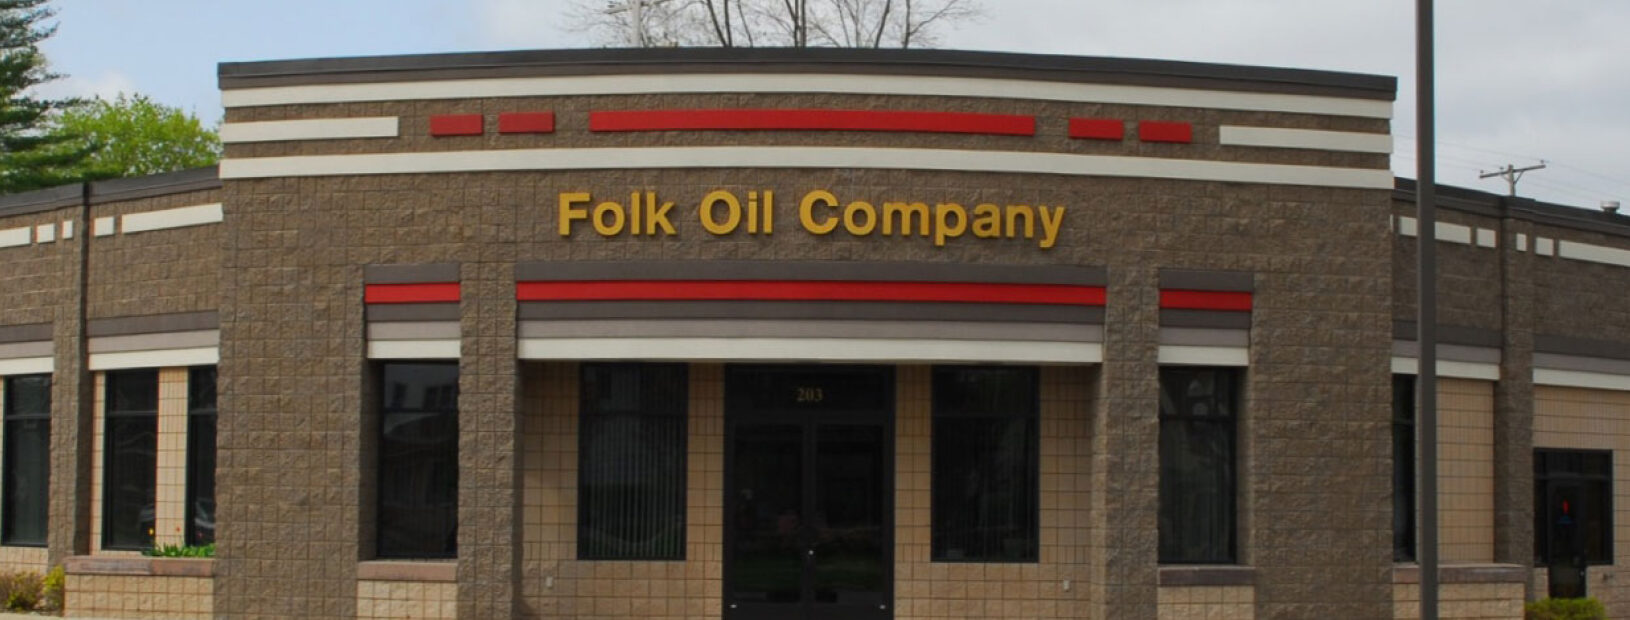 Fork Oil Company corporate building